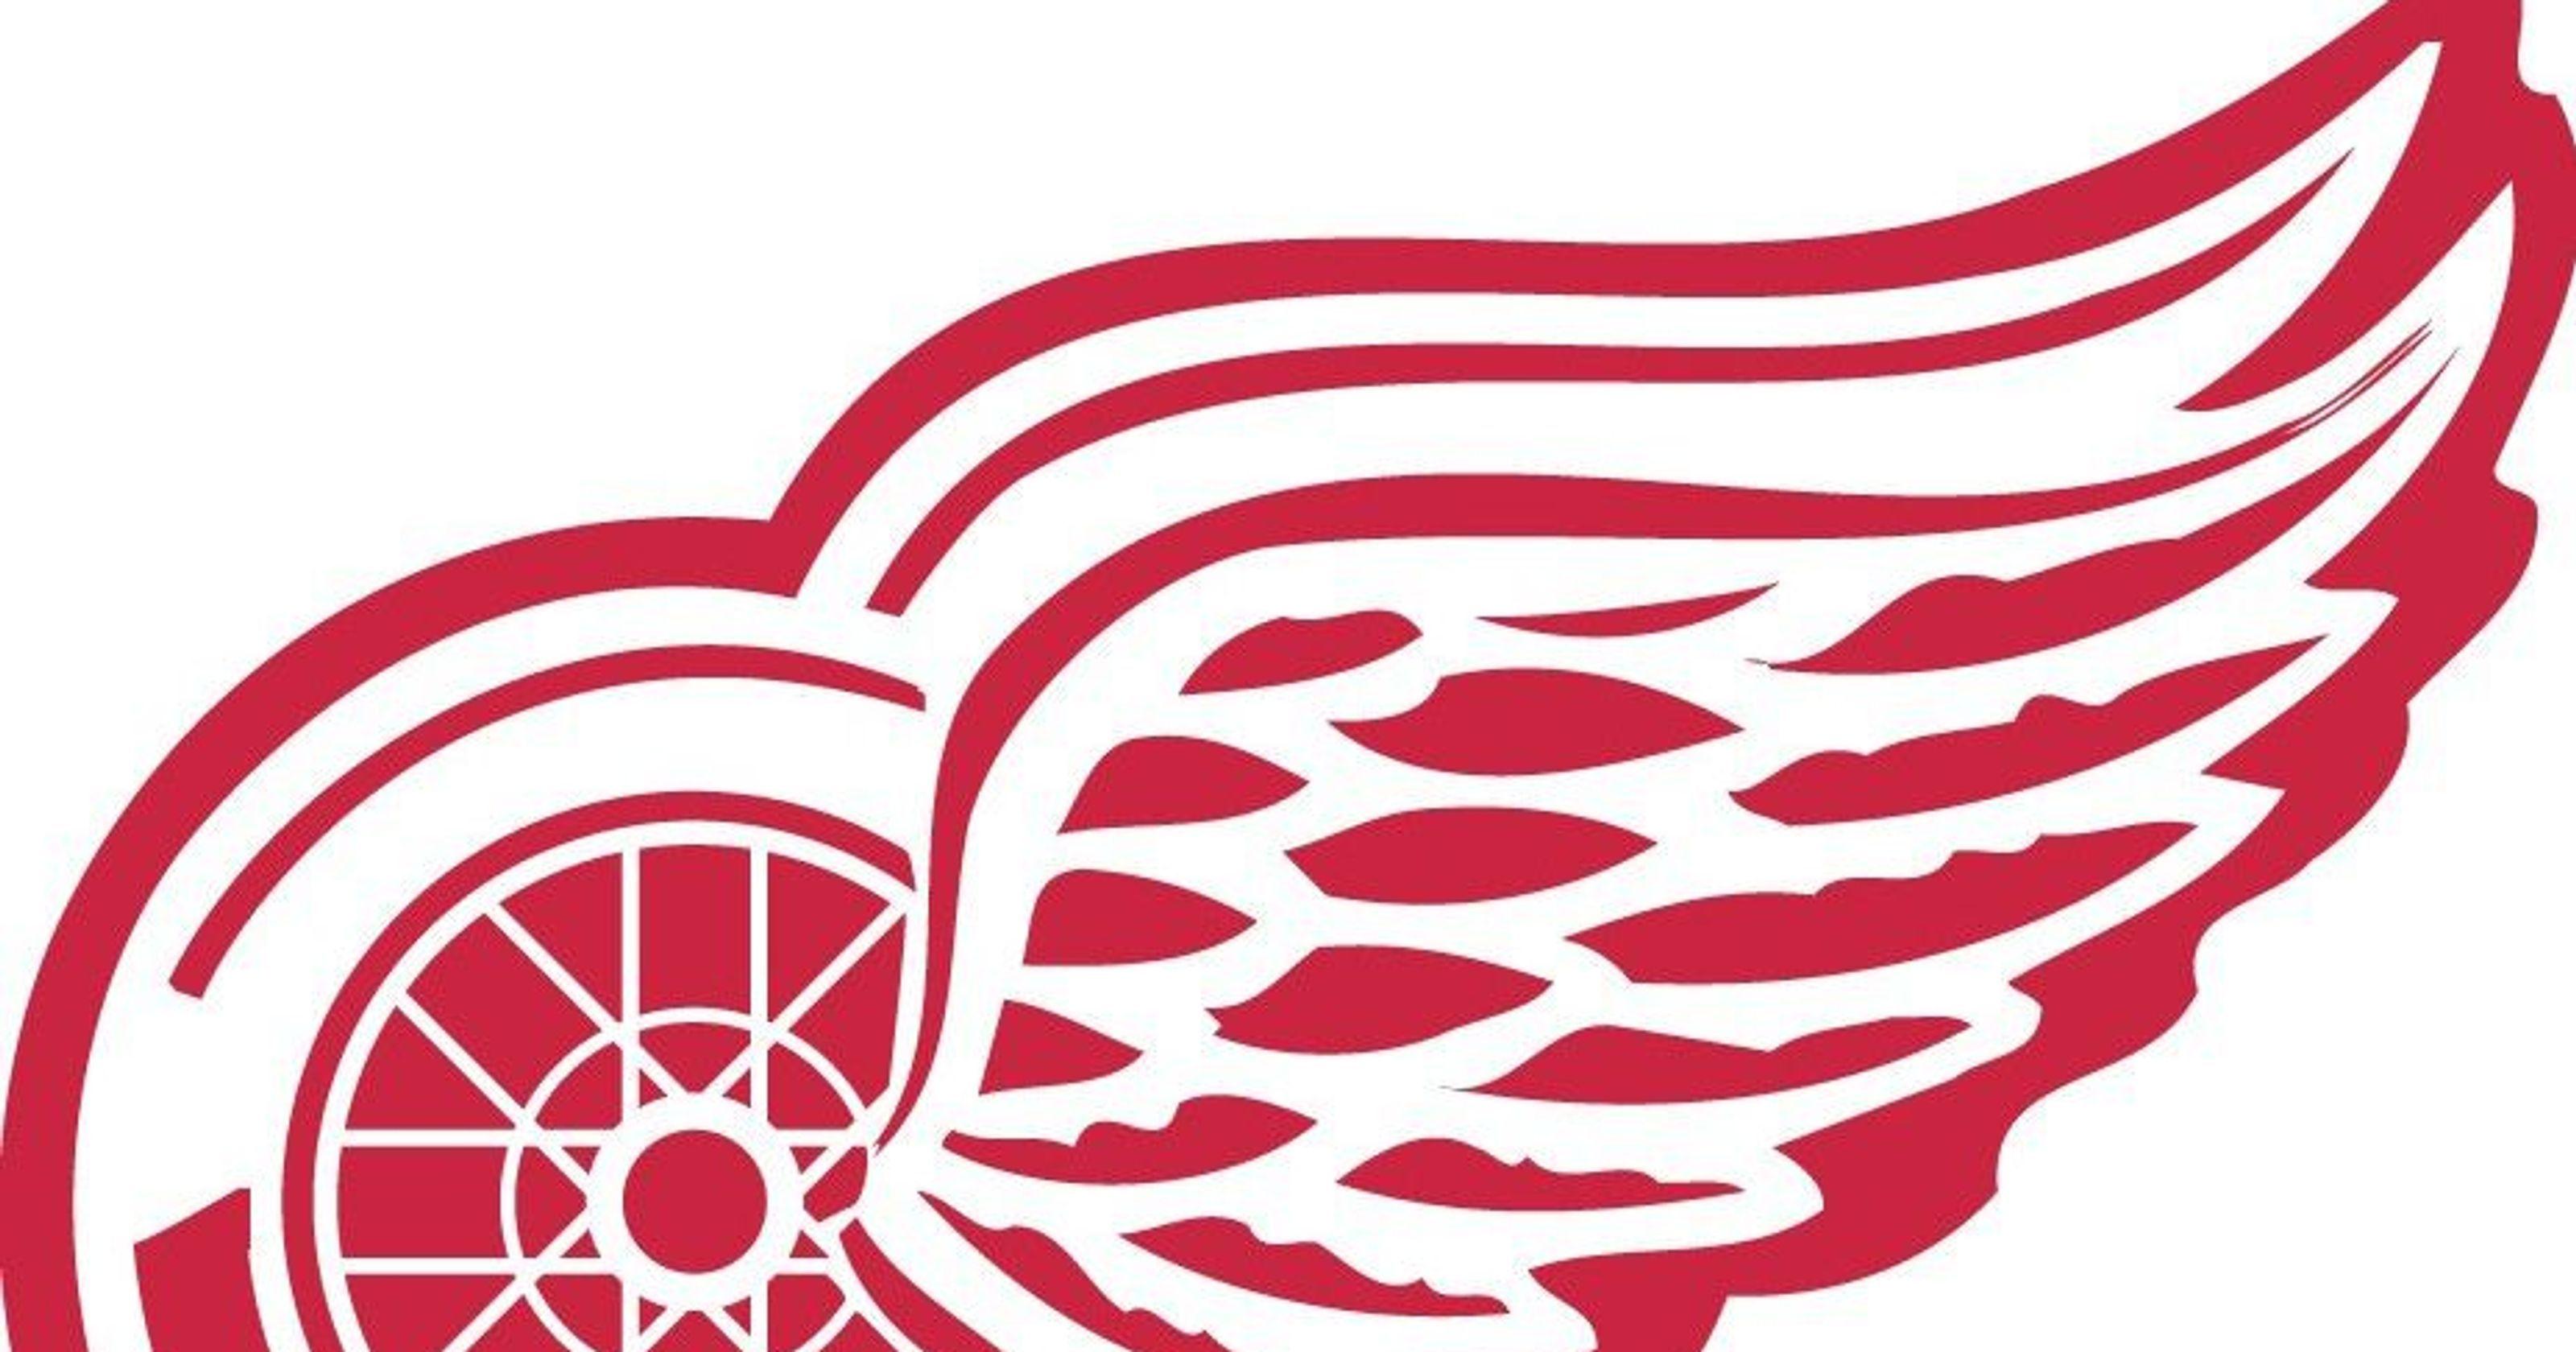 Black and White Detroit Red Wings Logo - Why did white nationalists use the Detroit Red Wings logo?